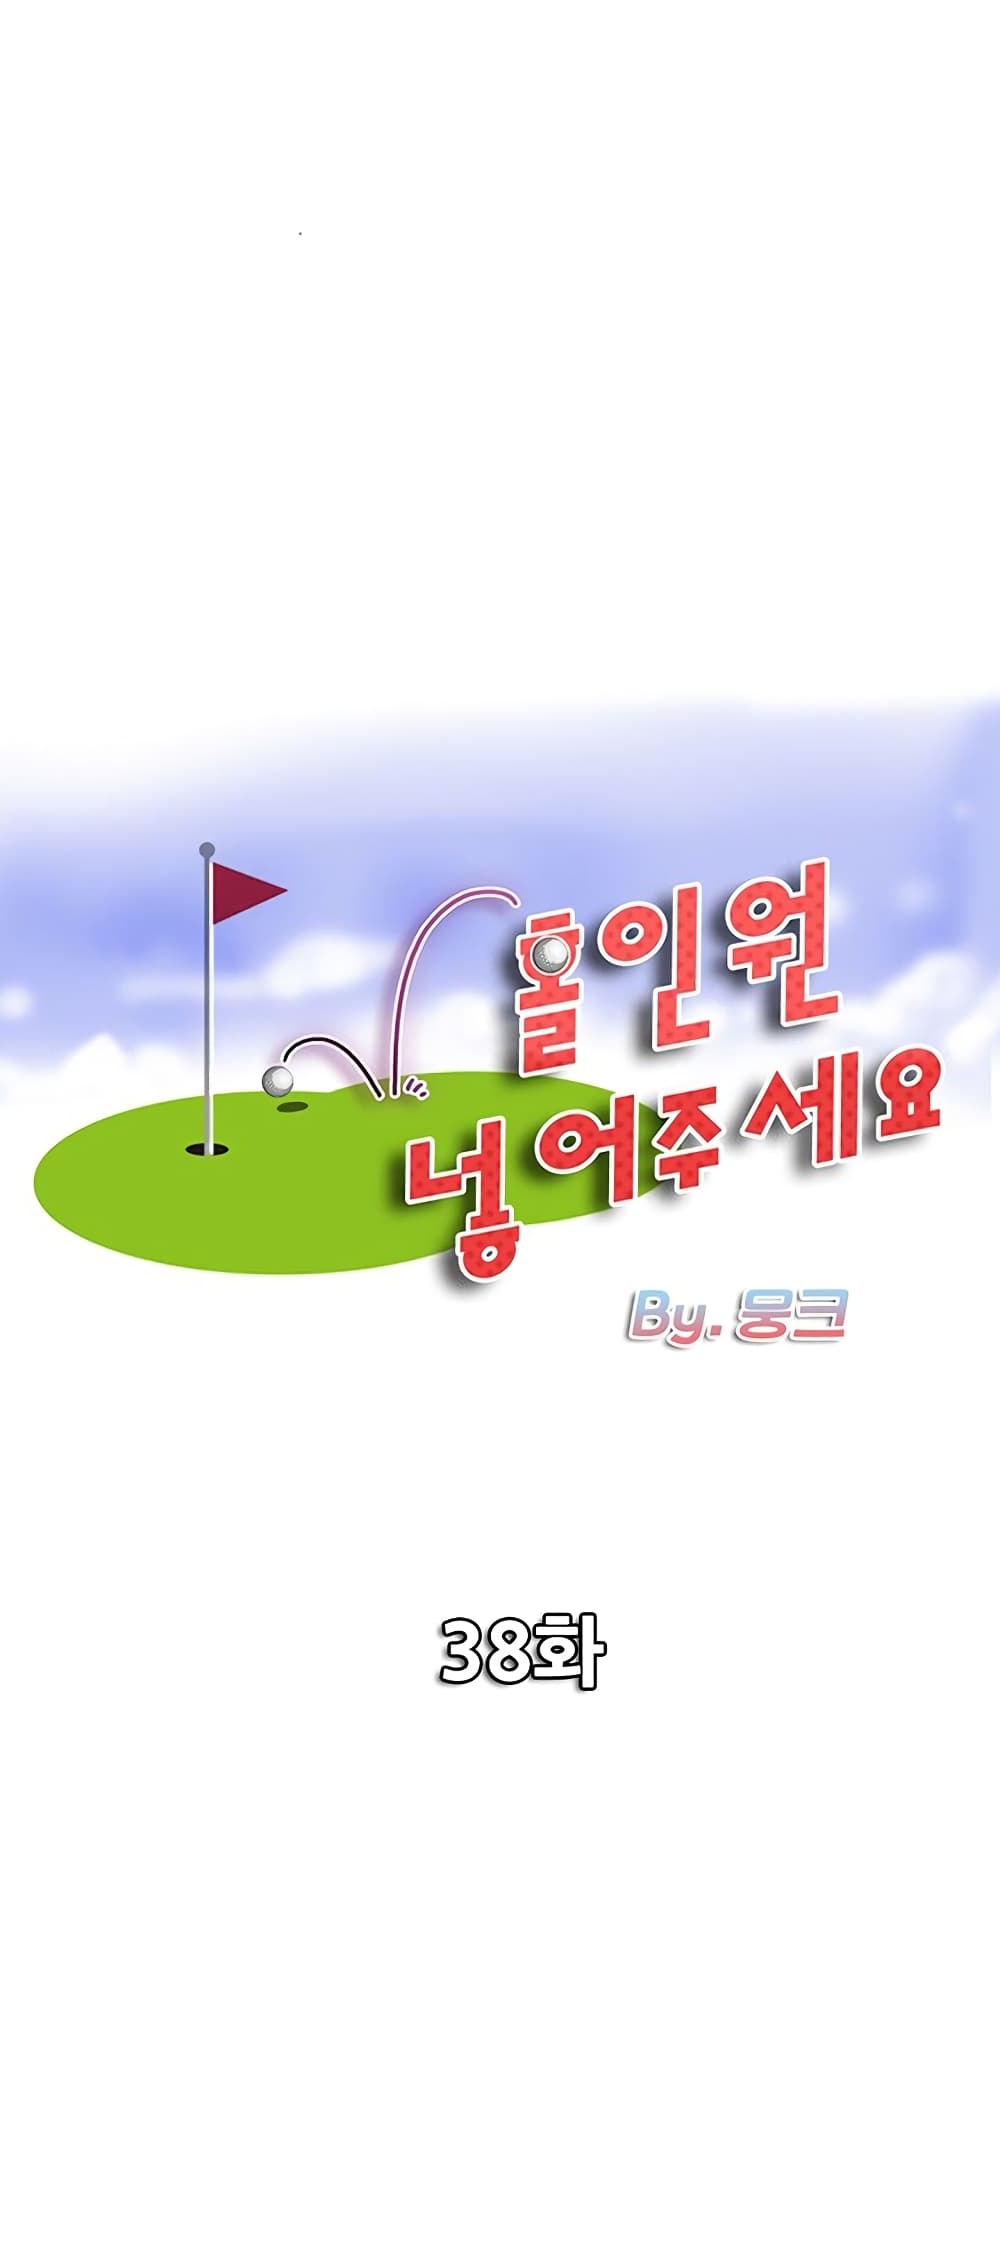 Hole In One38 (1)